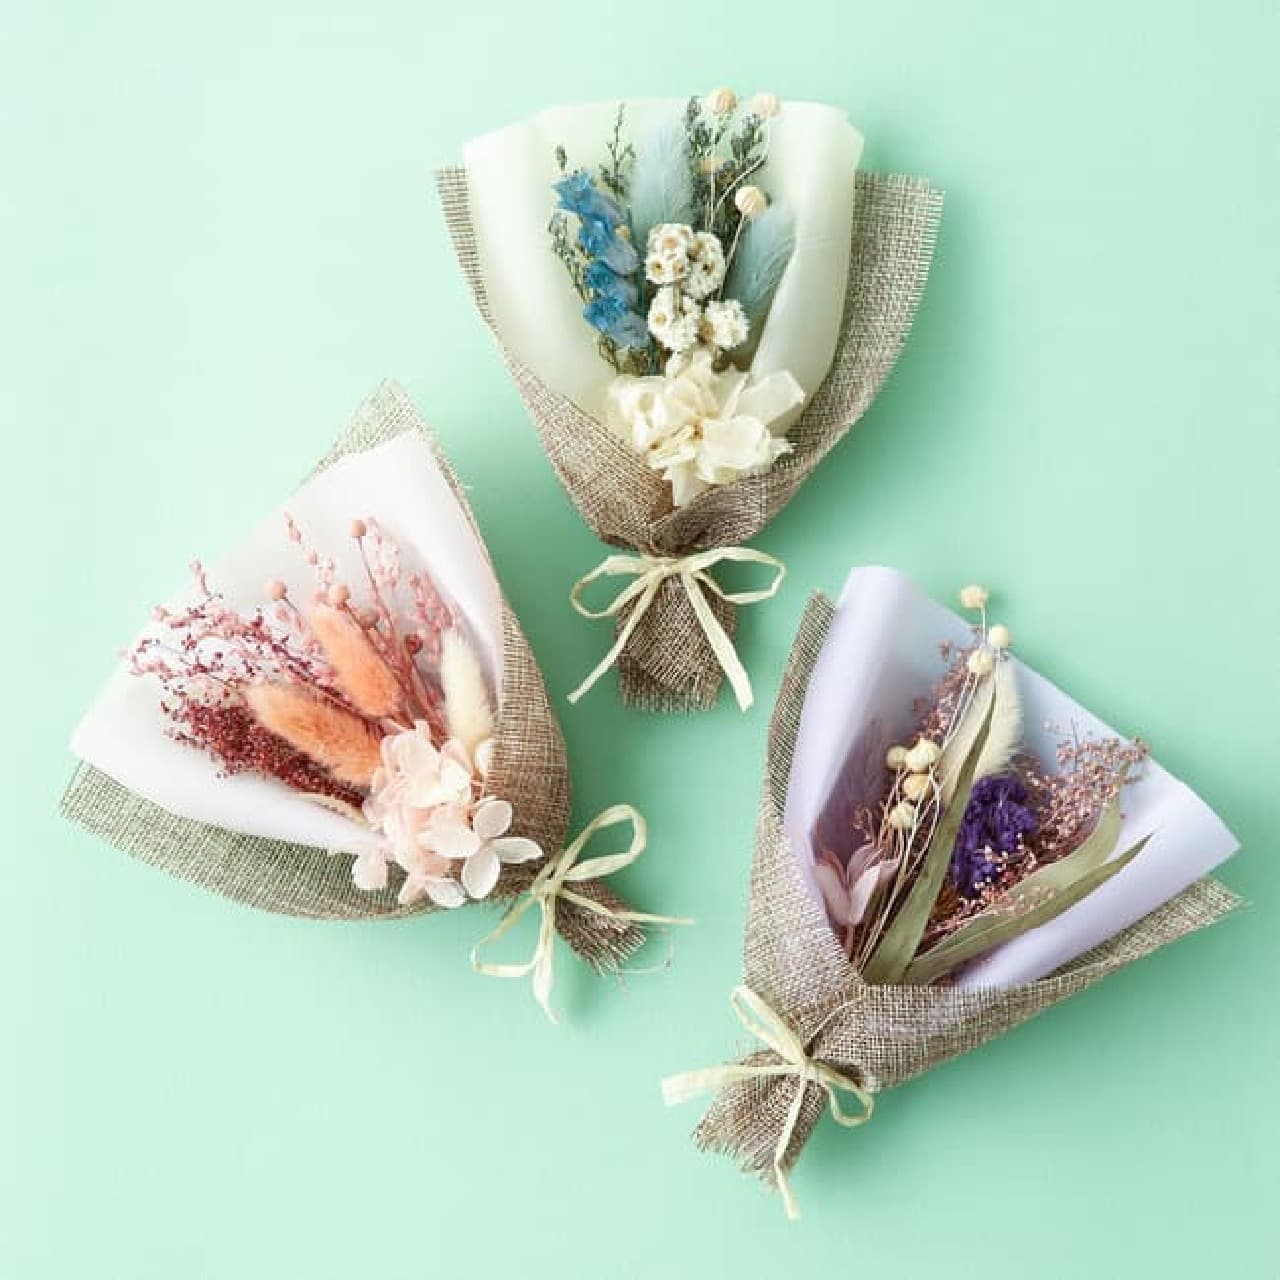 Francfranc's New Spring Gifts -- Dried Bouquet, 2WAY Knee Cover, Pair of Teacups, Tulip-Style Bath Salts, etc.